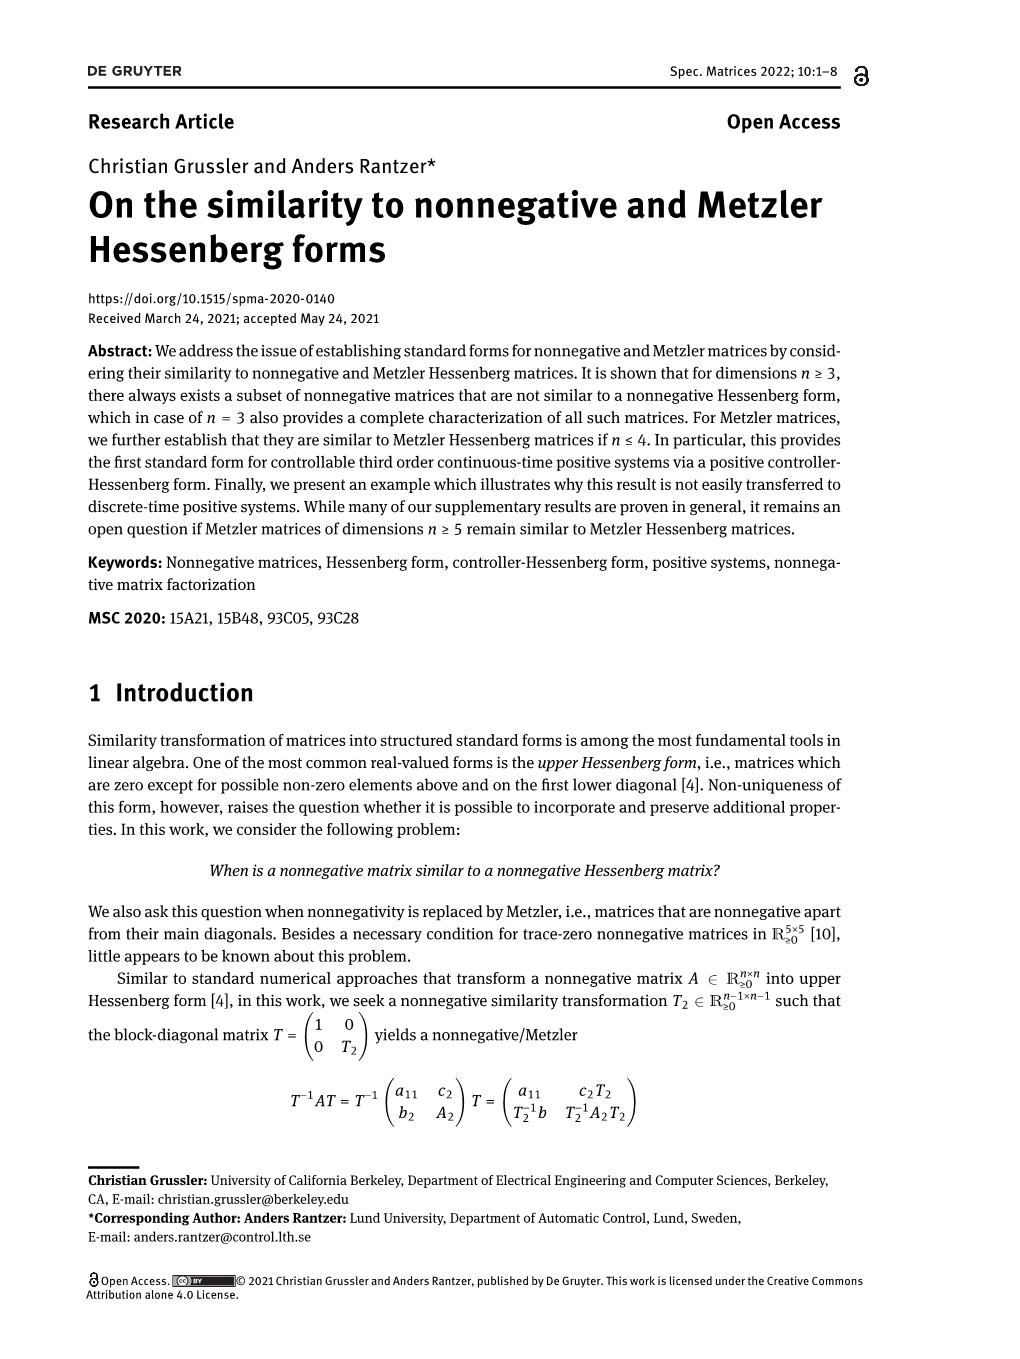 On the Similarity to Nonnegative and Metzler Hessenberg Forms Received March 24, 2021; Accepted May 24, 2021